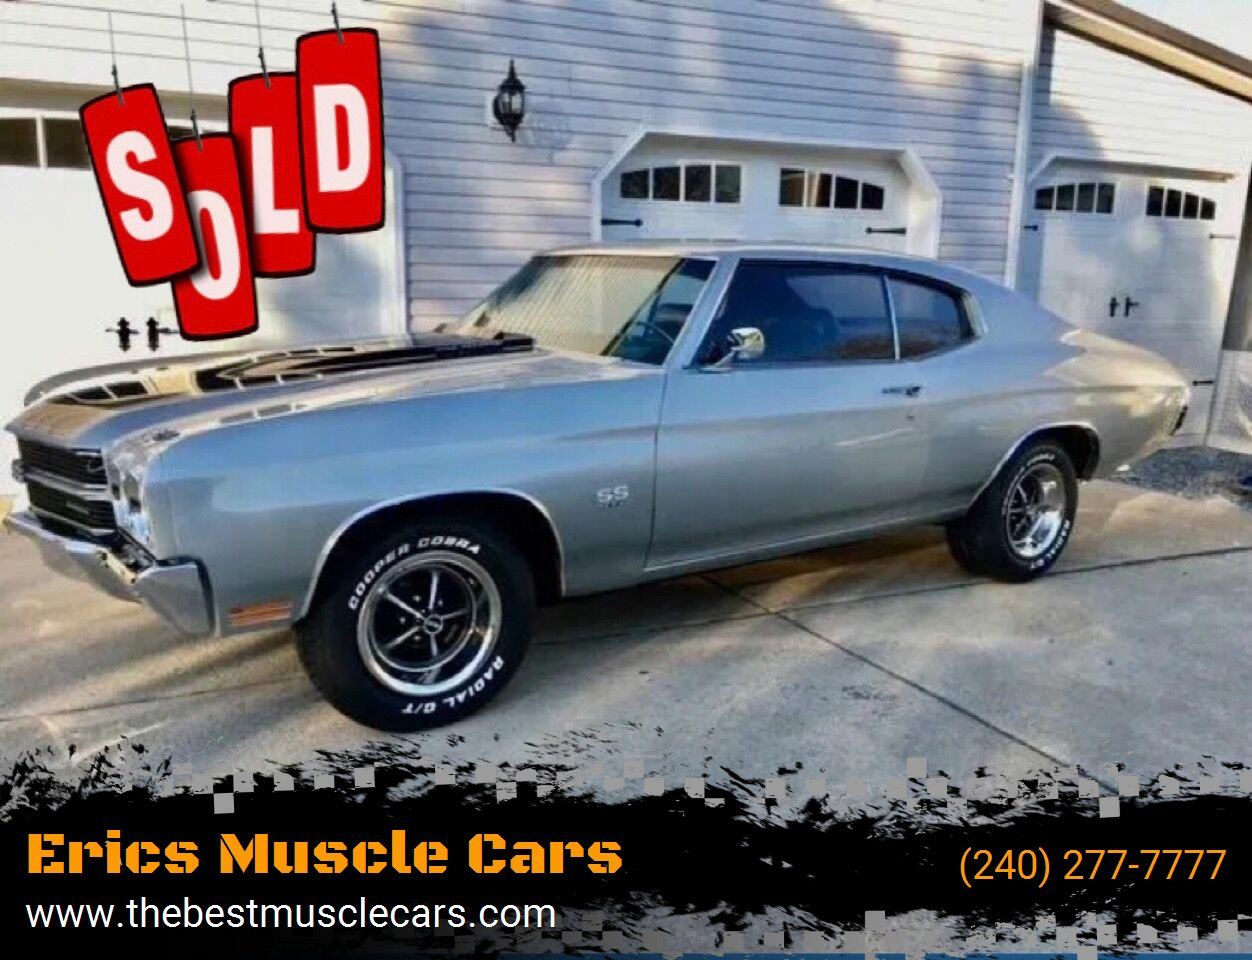 1970 Chevrolet Chevelle SS SOLD SOLD SOLD